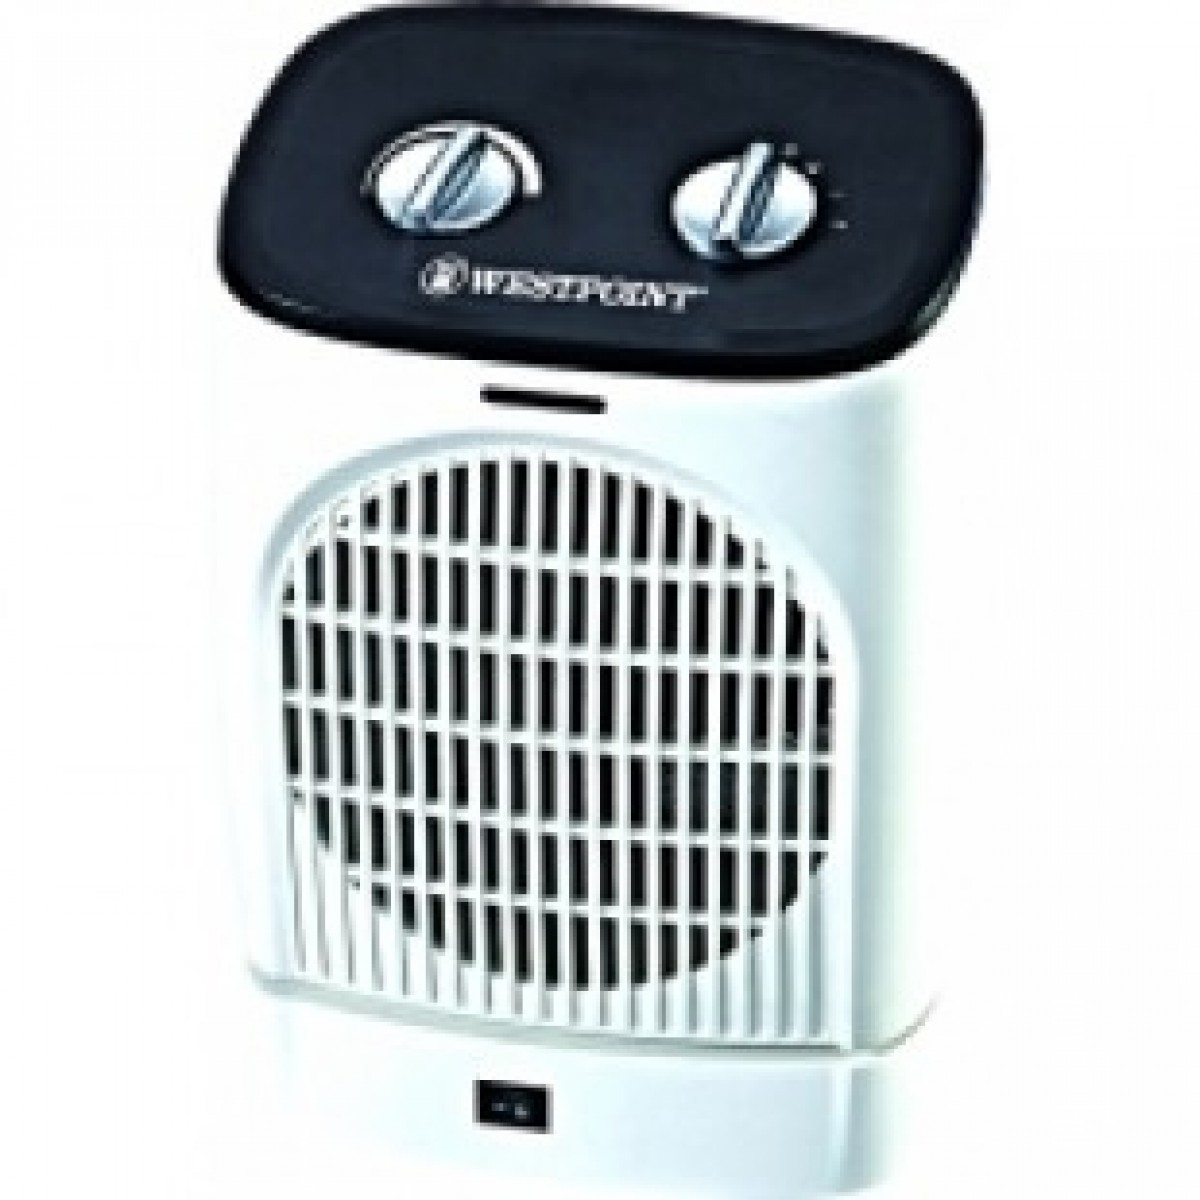 Westpoint Wf 5144 Fan Heater intended for sizing 1200 X 1200